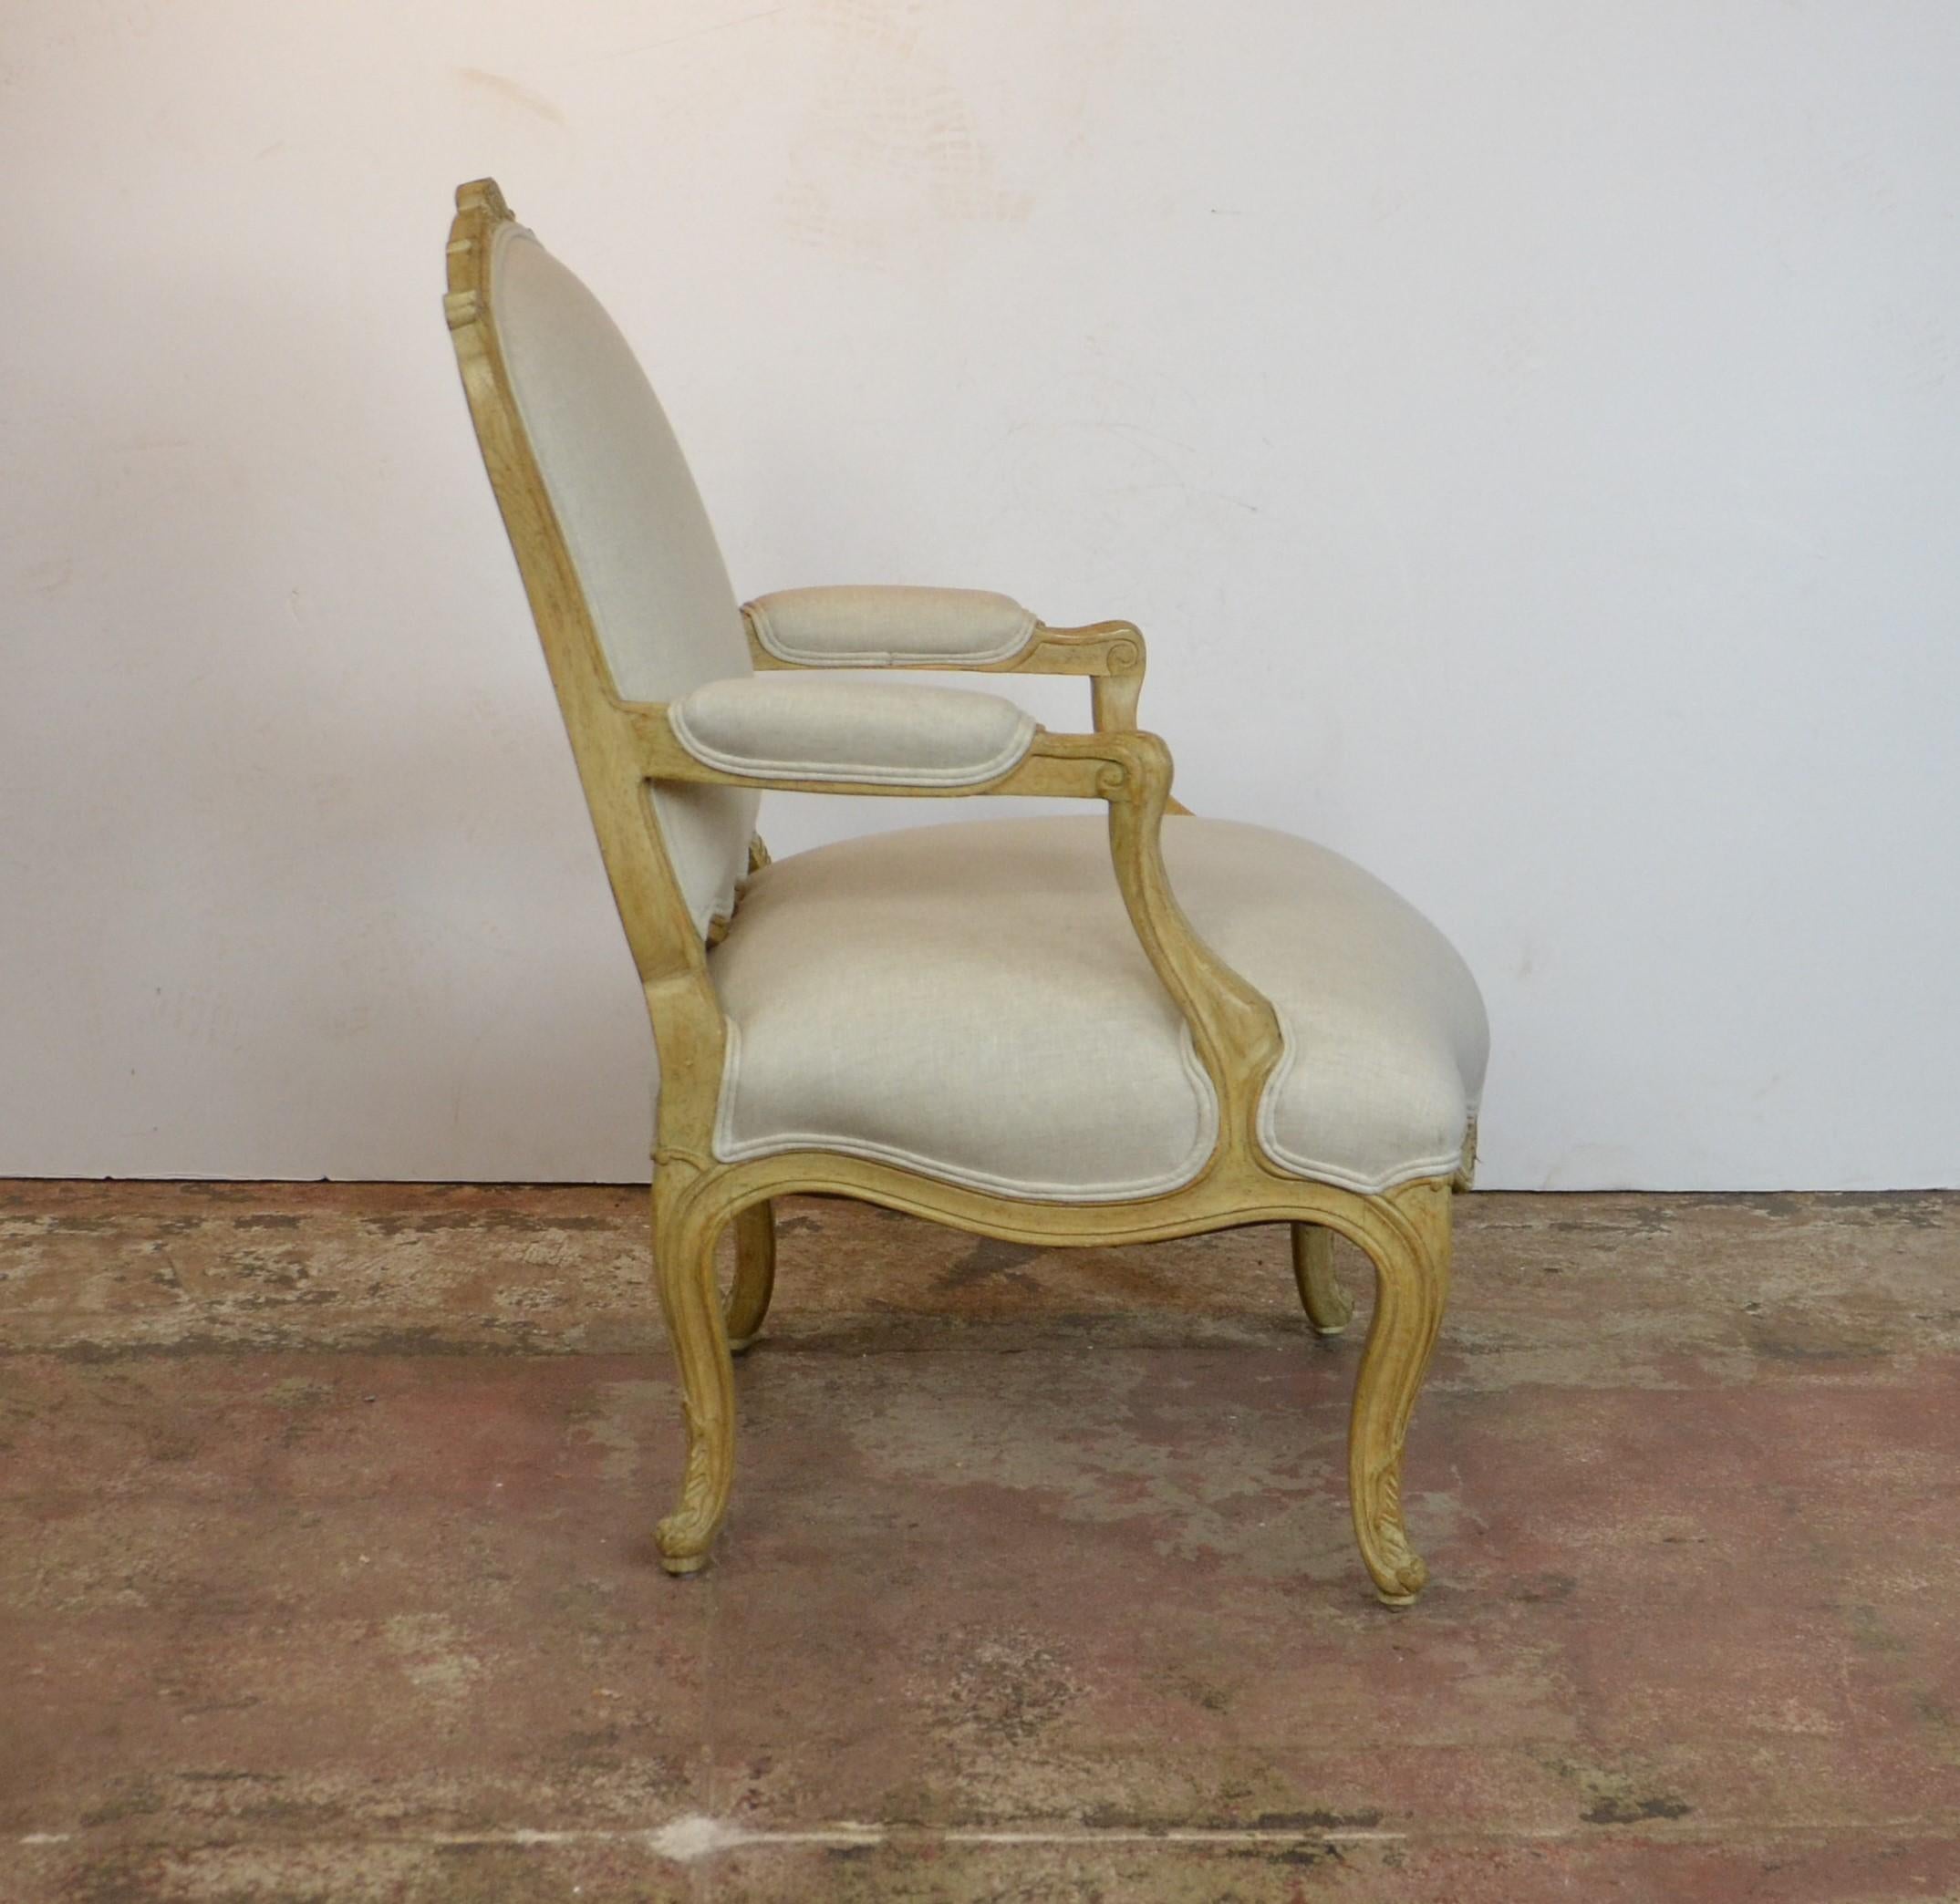 Louis XV style armchair. Upholstered in linen. Measures: Arm 24